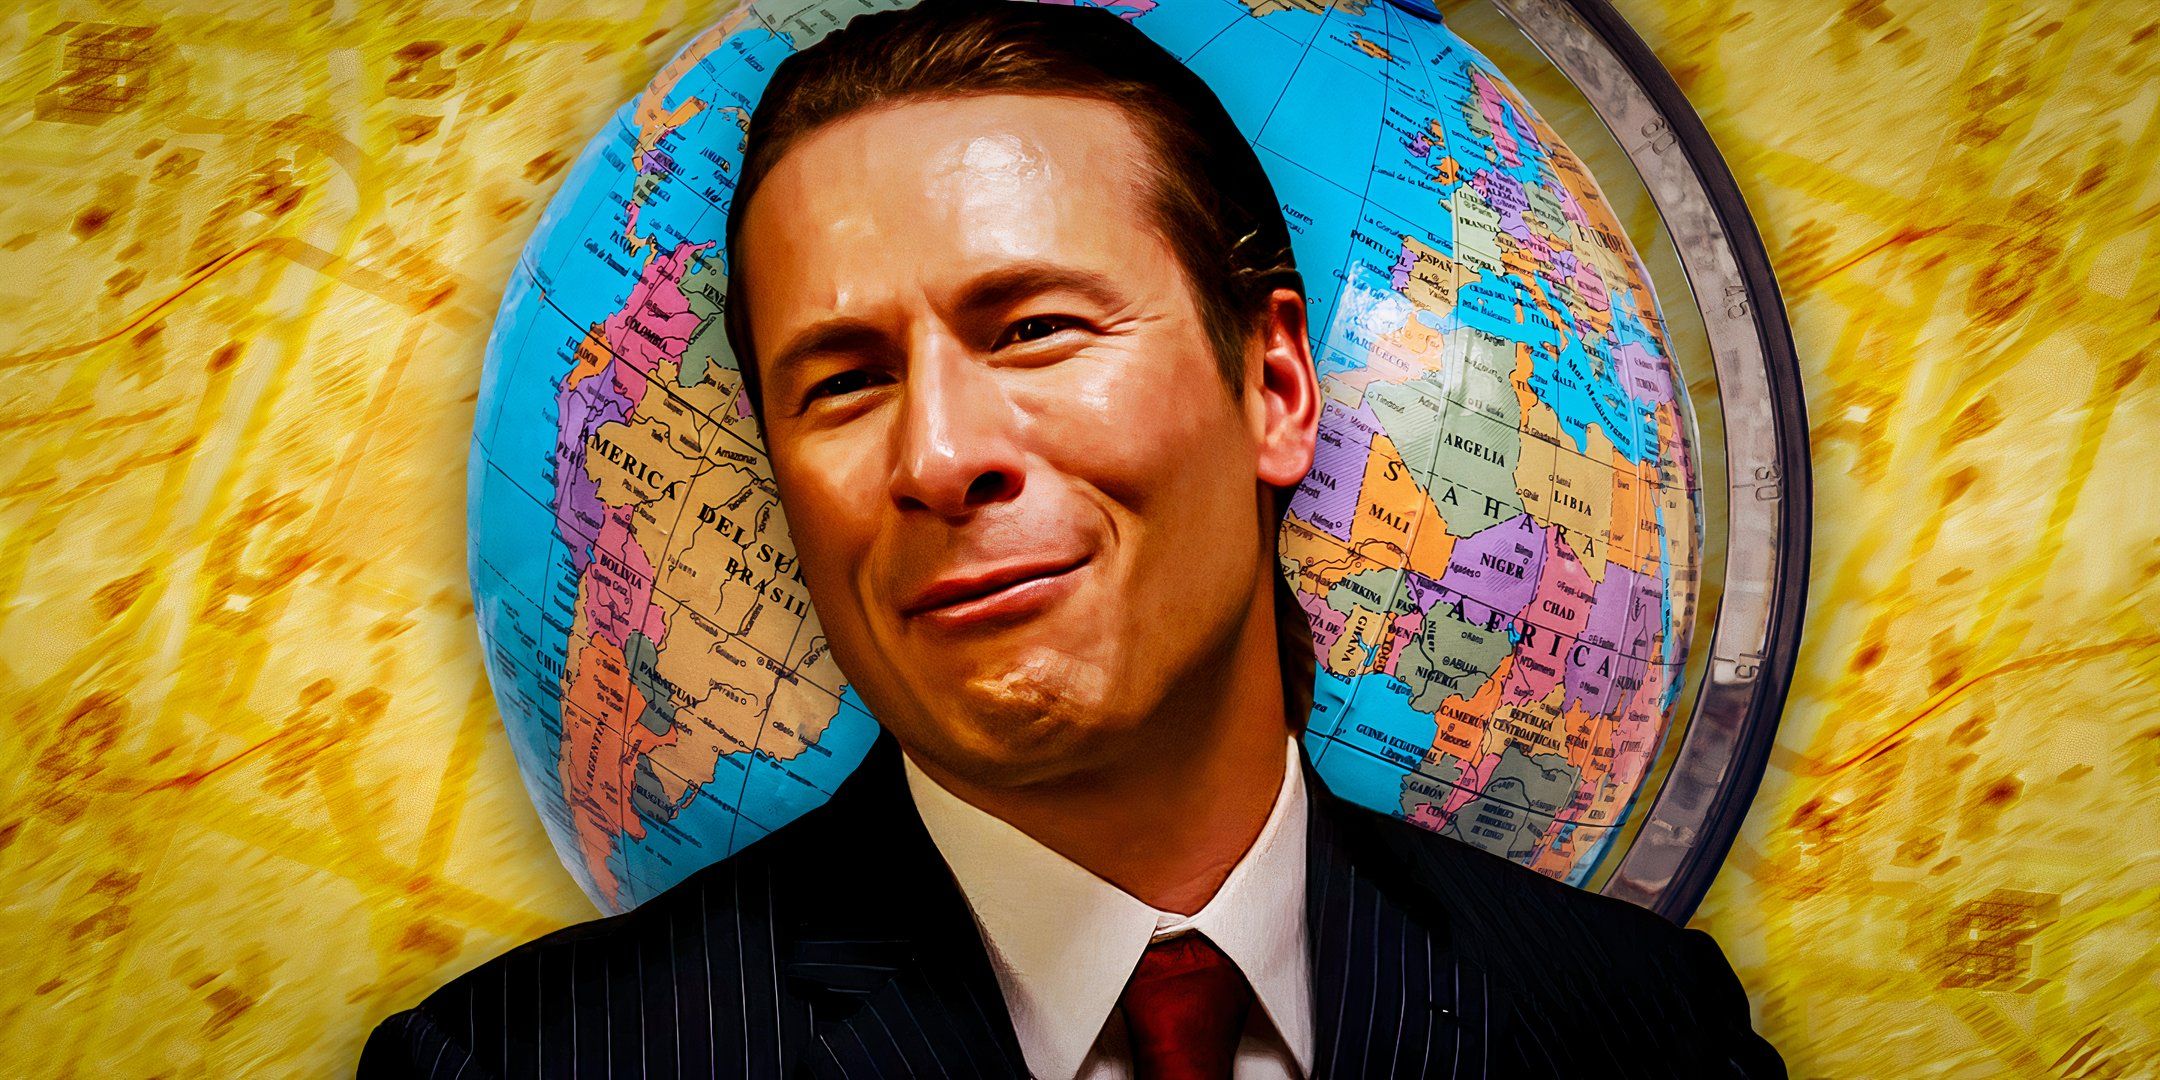 Glen Powell as one of his hitman identities in Hit Man on top of an image of the globe